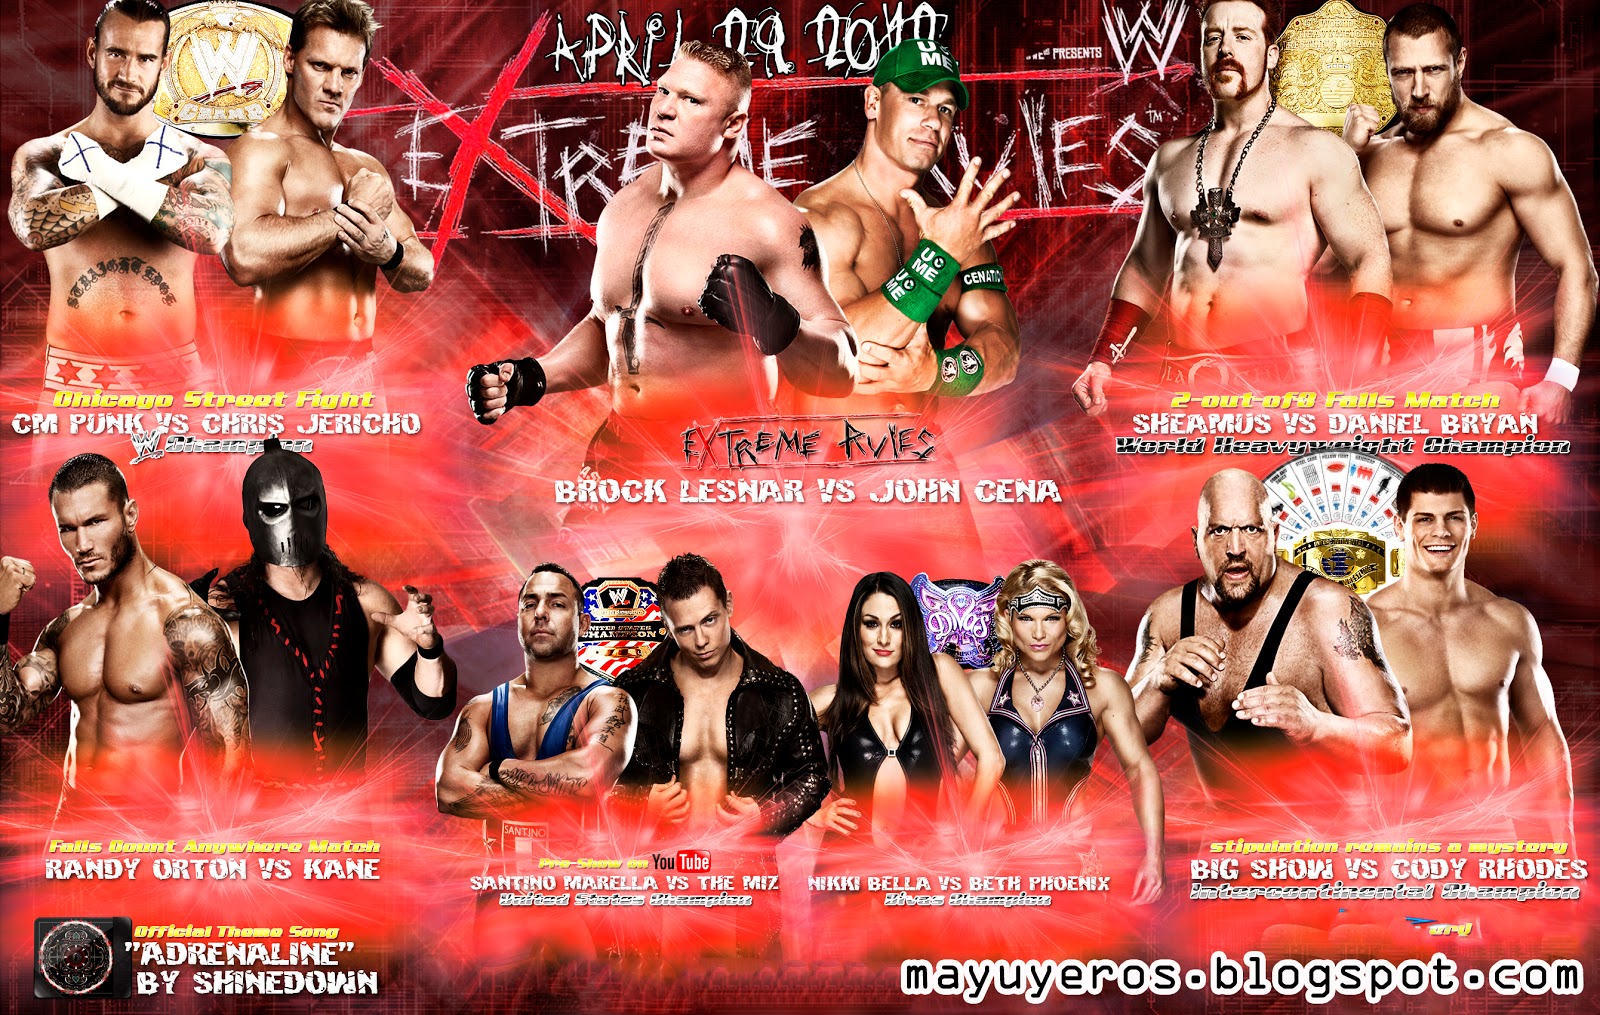 PIZZABODYSLAM: WWE PPV PREDICTION GAME: WWE TLC: TABLES, LADDERS …